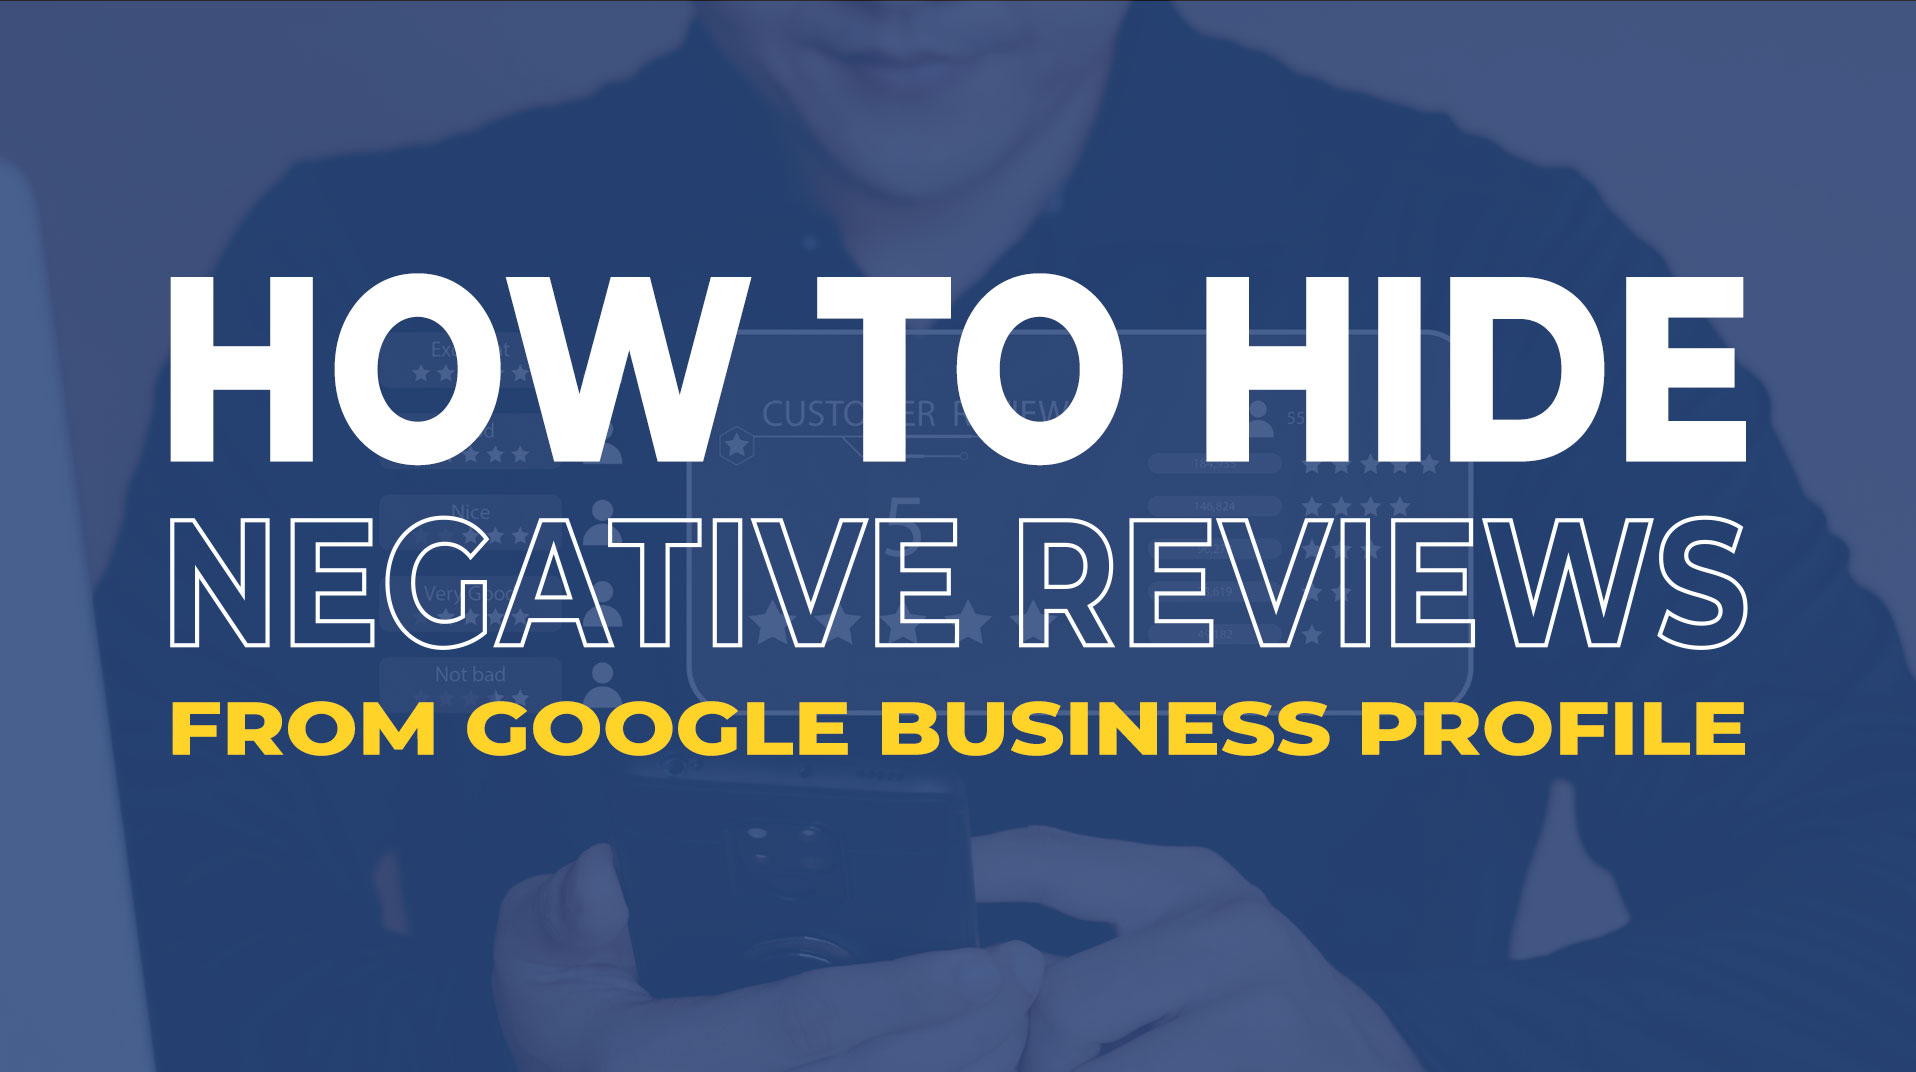 How to Hide Negative Reviews from Google